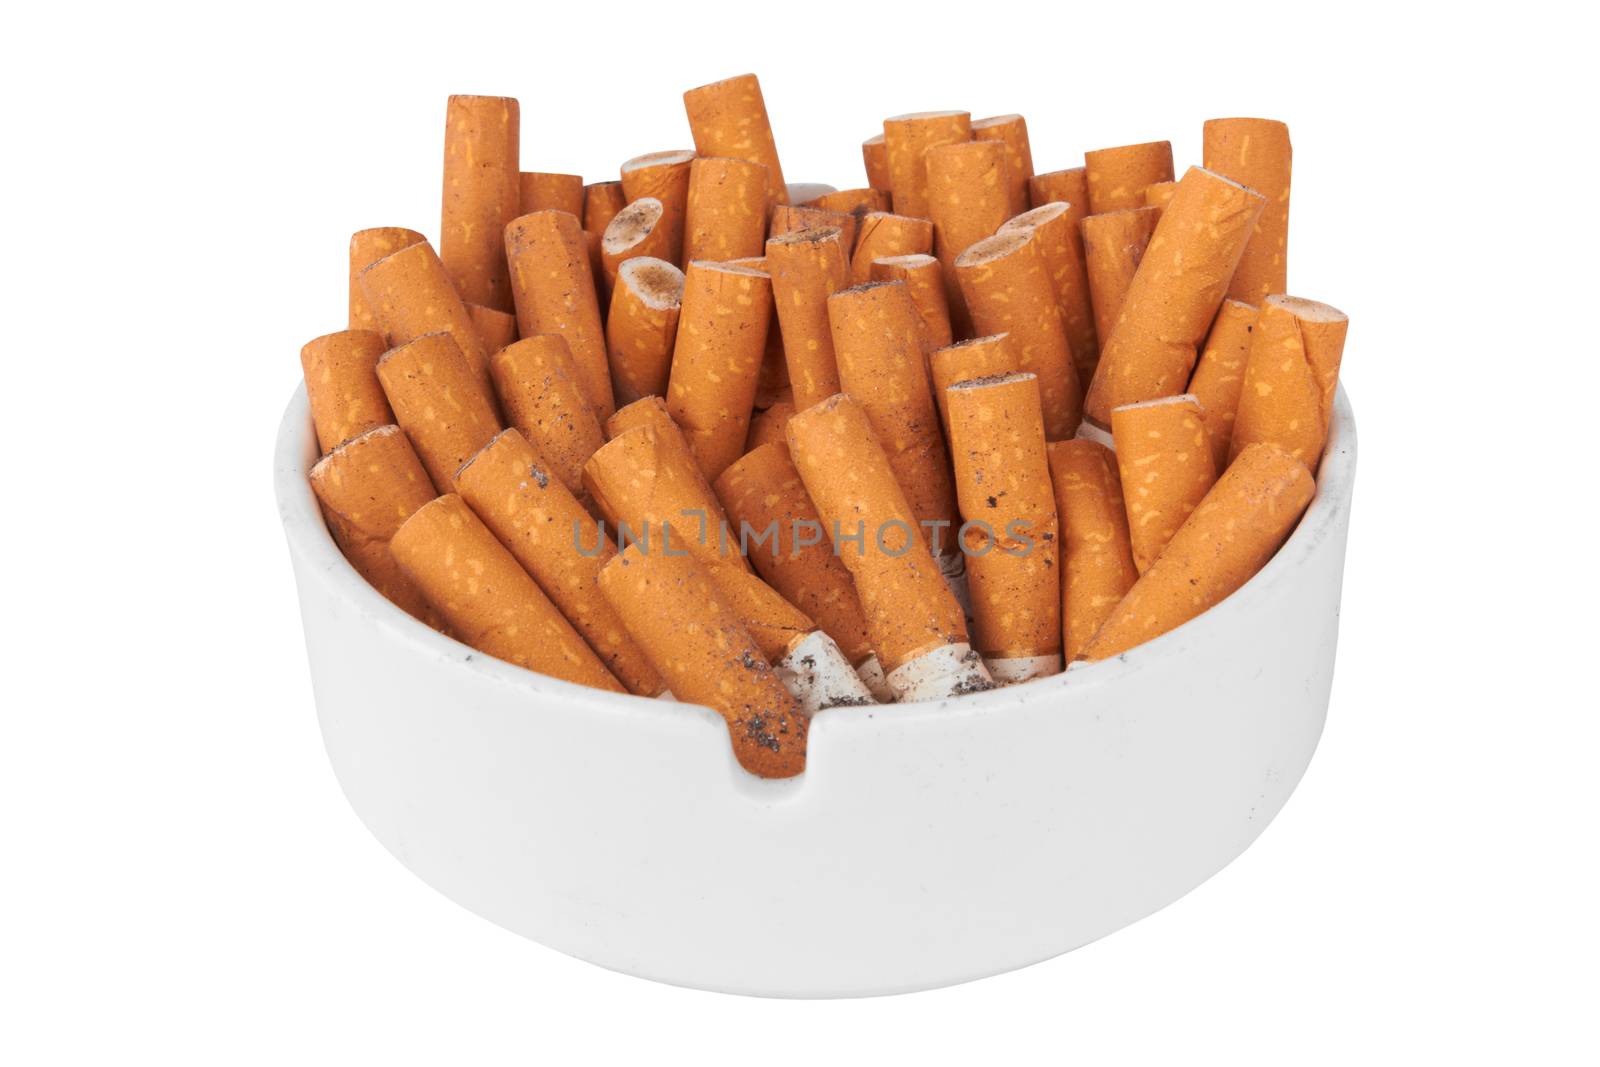 A dirty ashtray full of cigarette ash and butts 